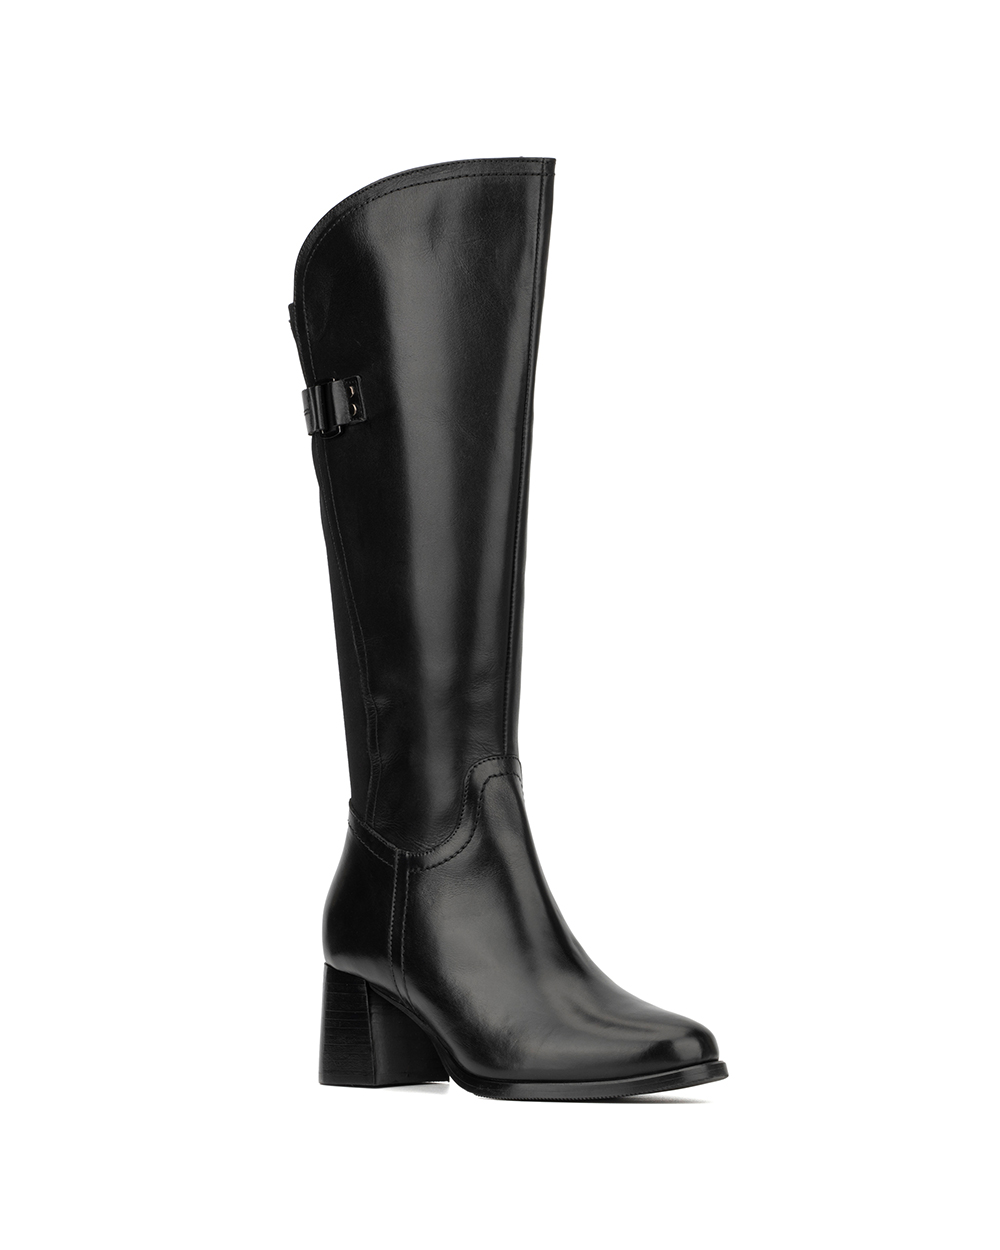 Vintage Foundry Co. - Women's Zuly Tall Boot - Reitmans